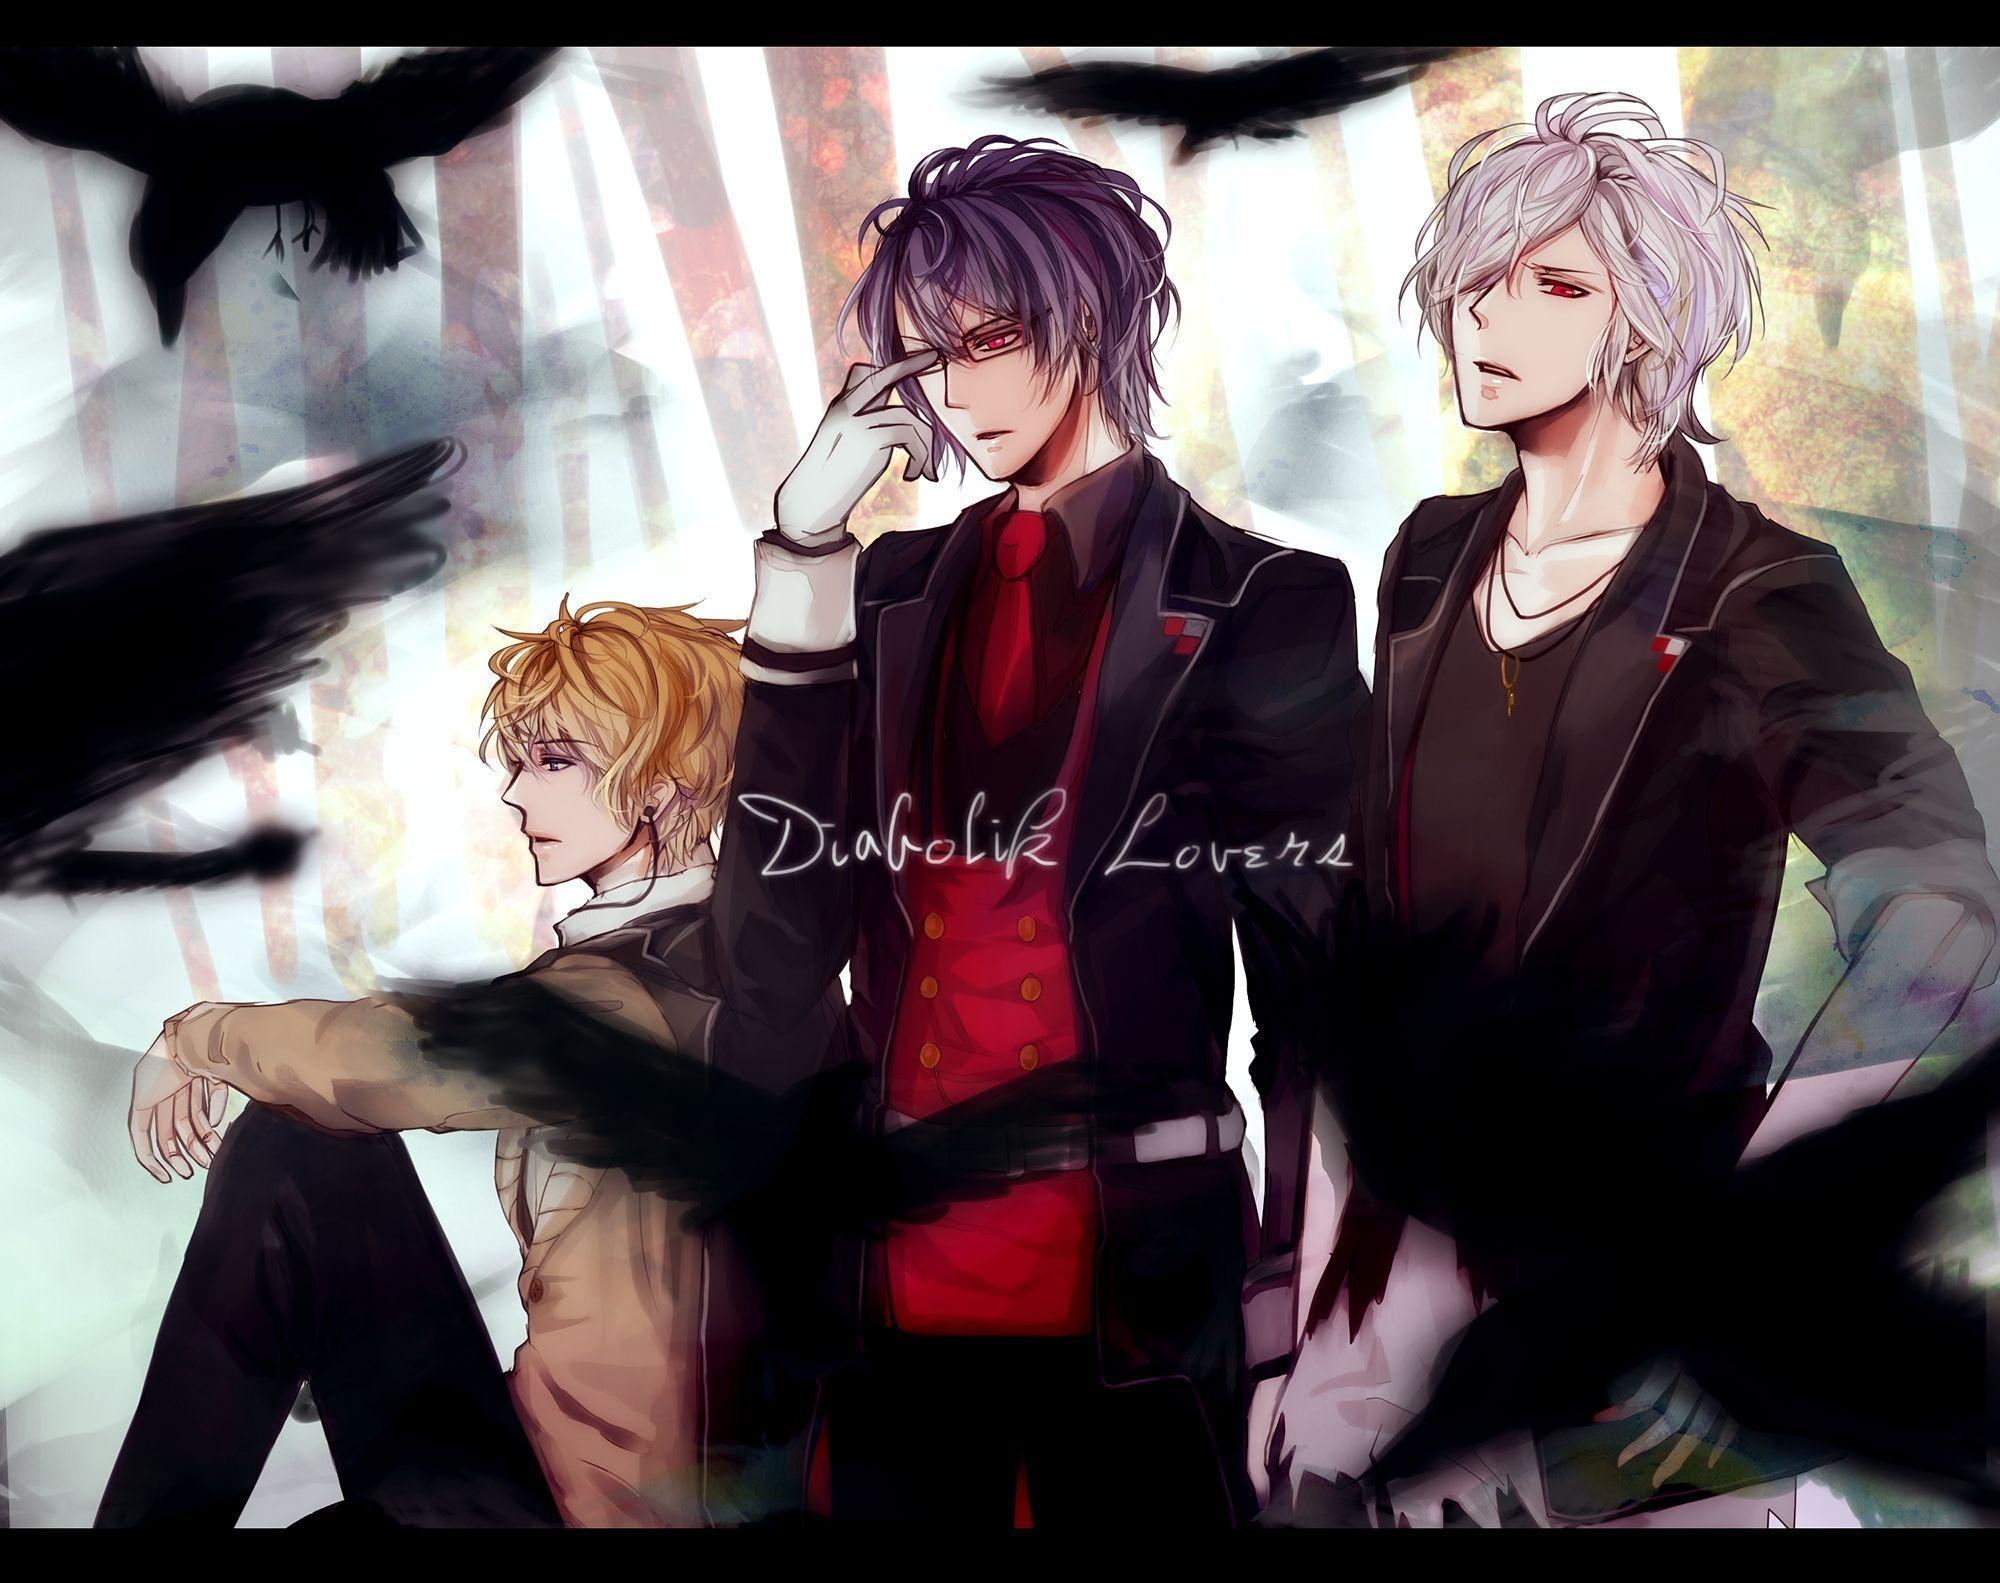 1000+ image about diabolik lovers